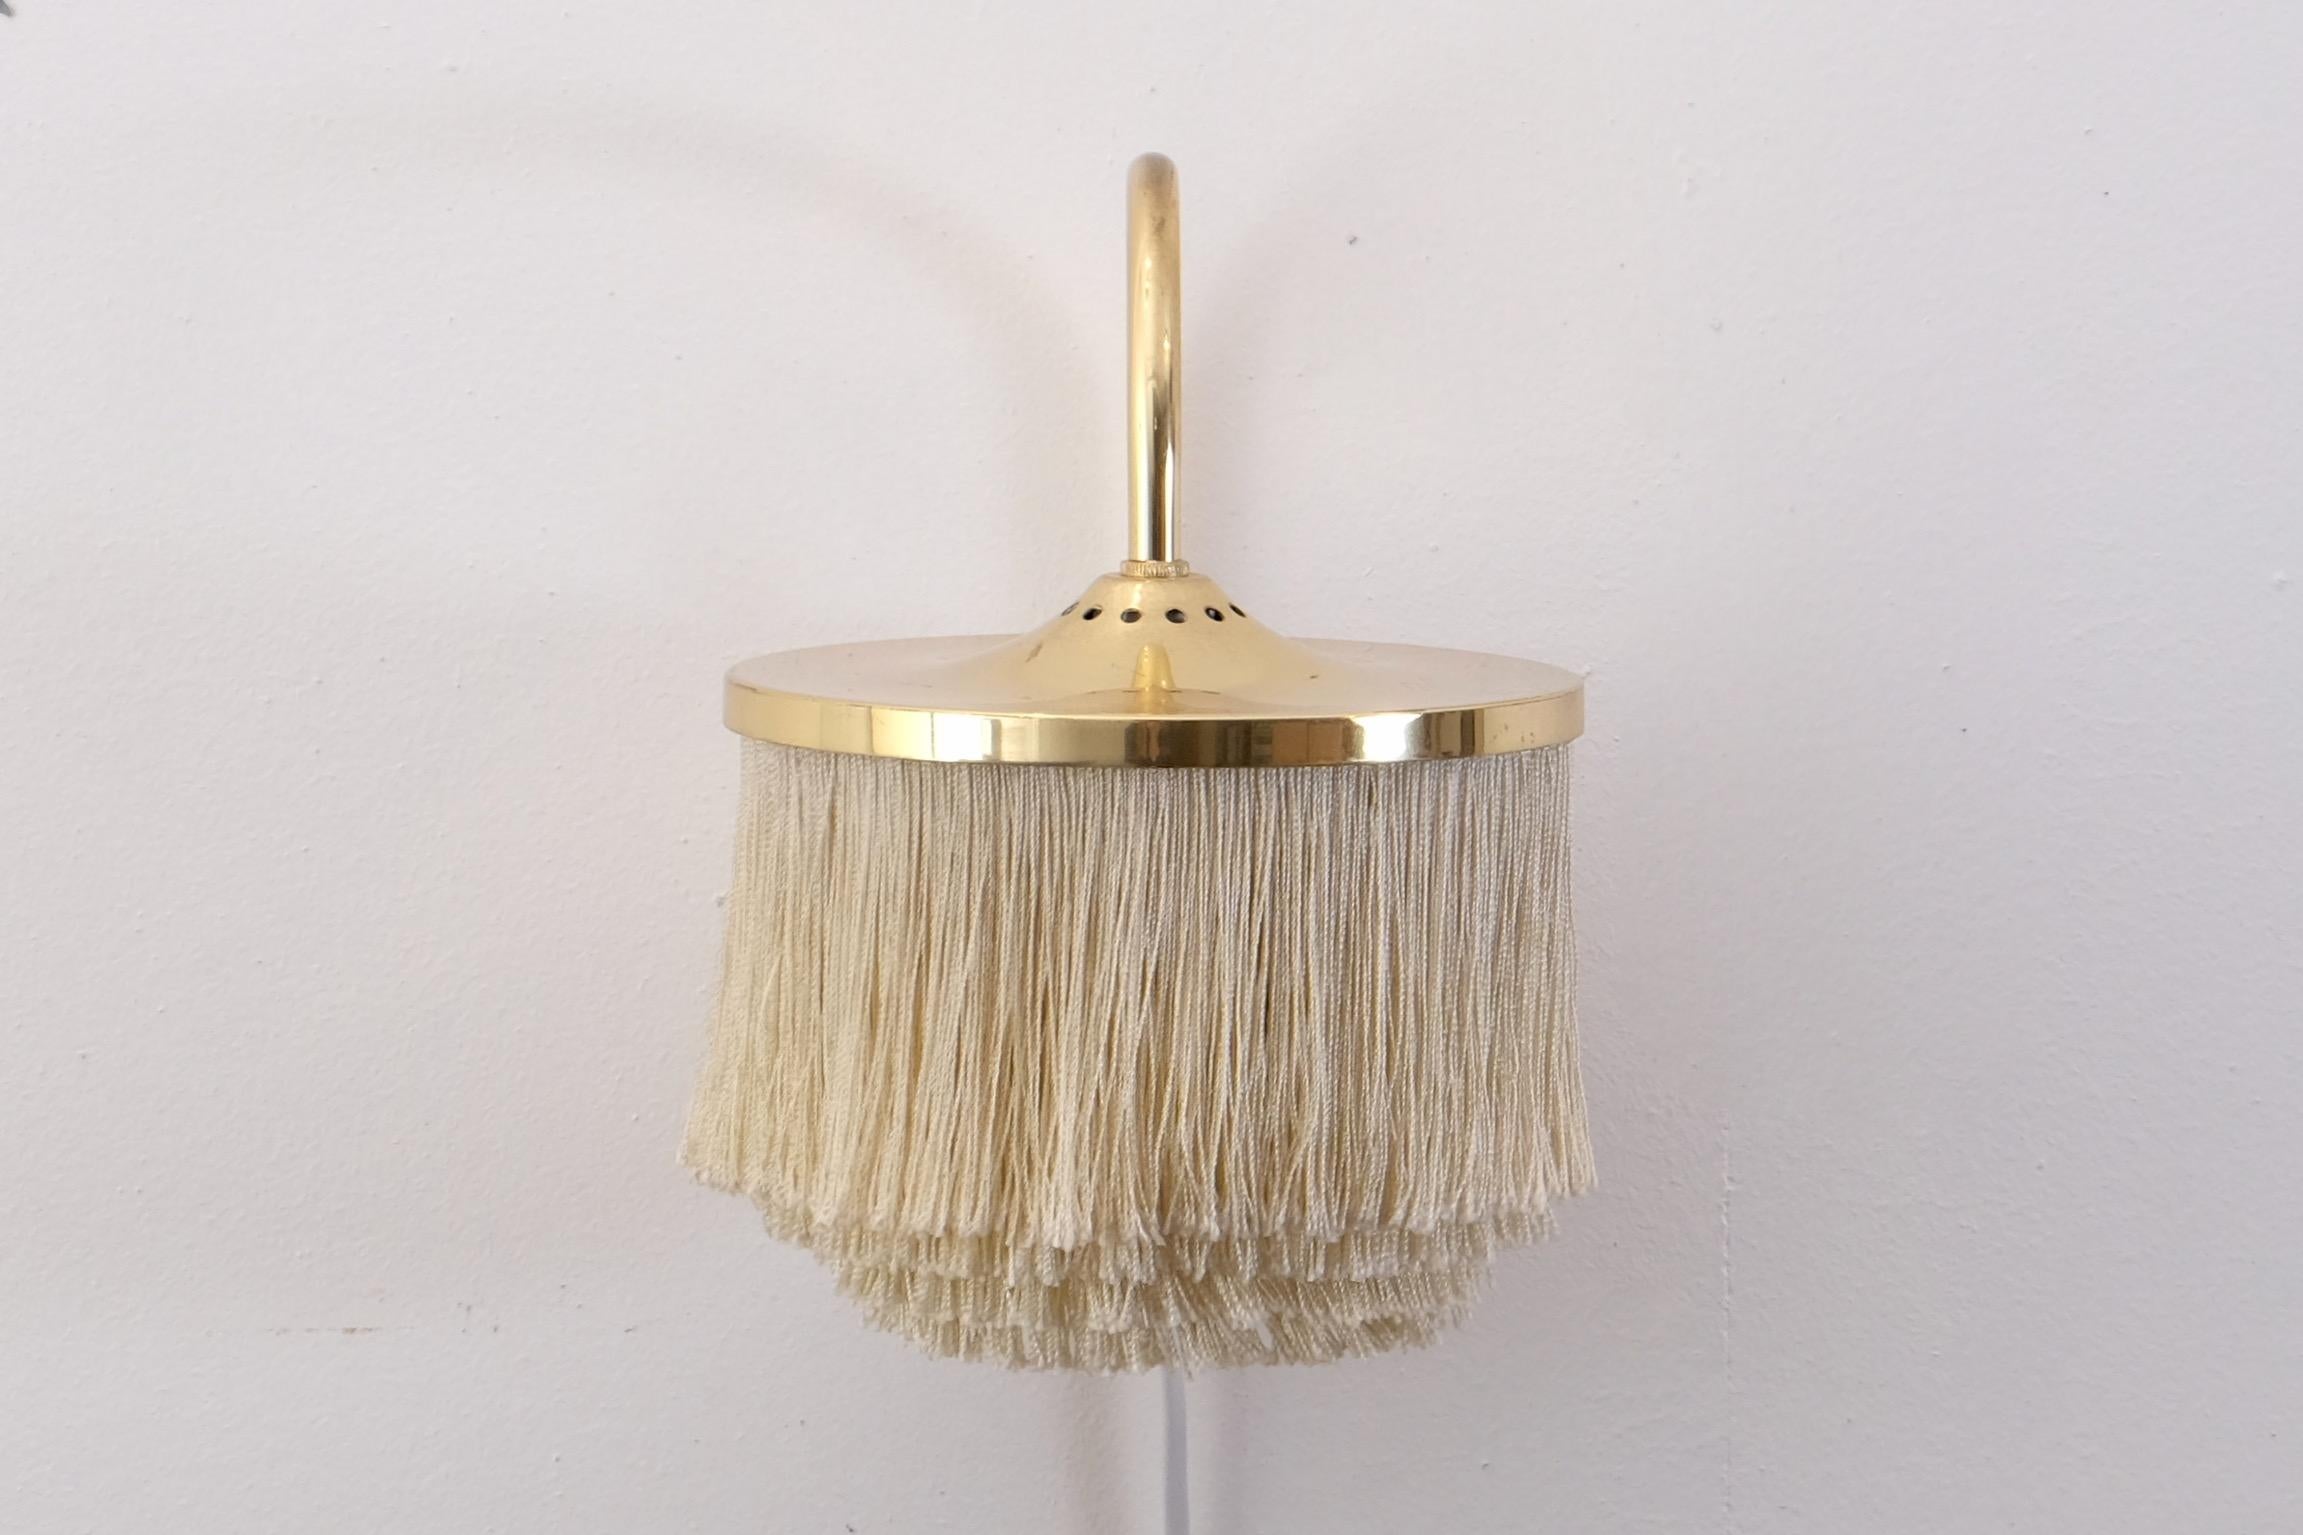 Swedish fringes wall light model V271 designed by Hans-Agne Jakobsson, produced in Markaryd, Sweden, 1960s.

Measures: Diameter 16.5 cm
Distance from wall 19.5 cm
Top of arm to bottom of shade 23 cm
Height 16 cm
Max 40 W.
 